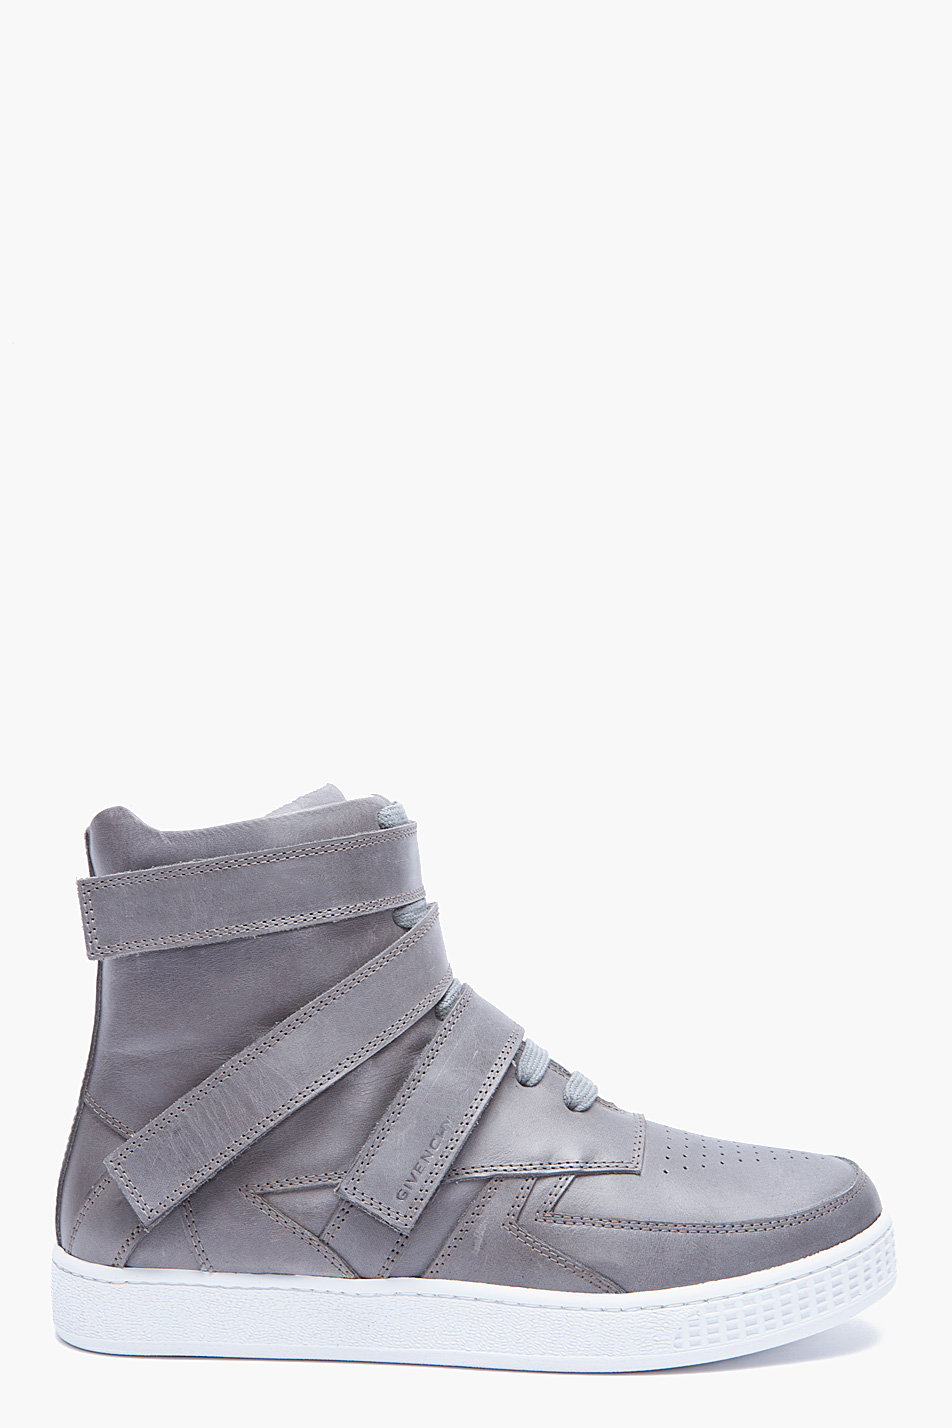 Givenchy Velcro Sneakers in Gray for Men (grey) | Lyst